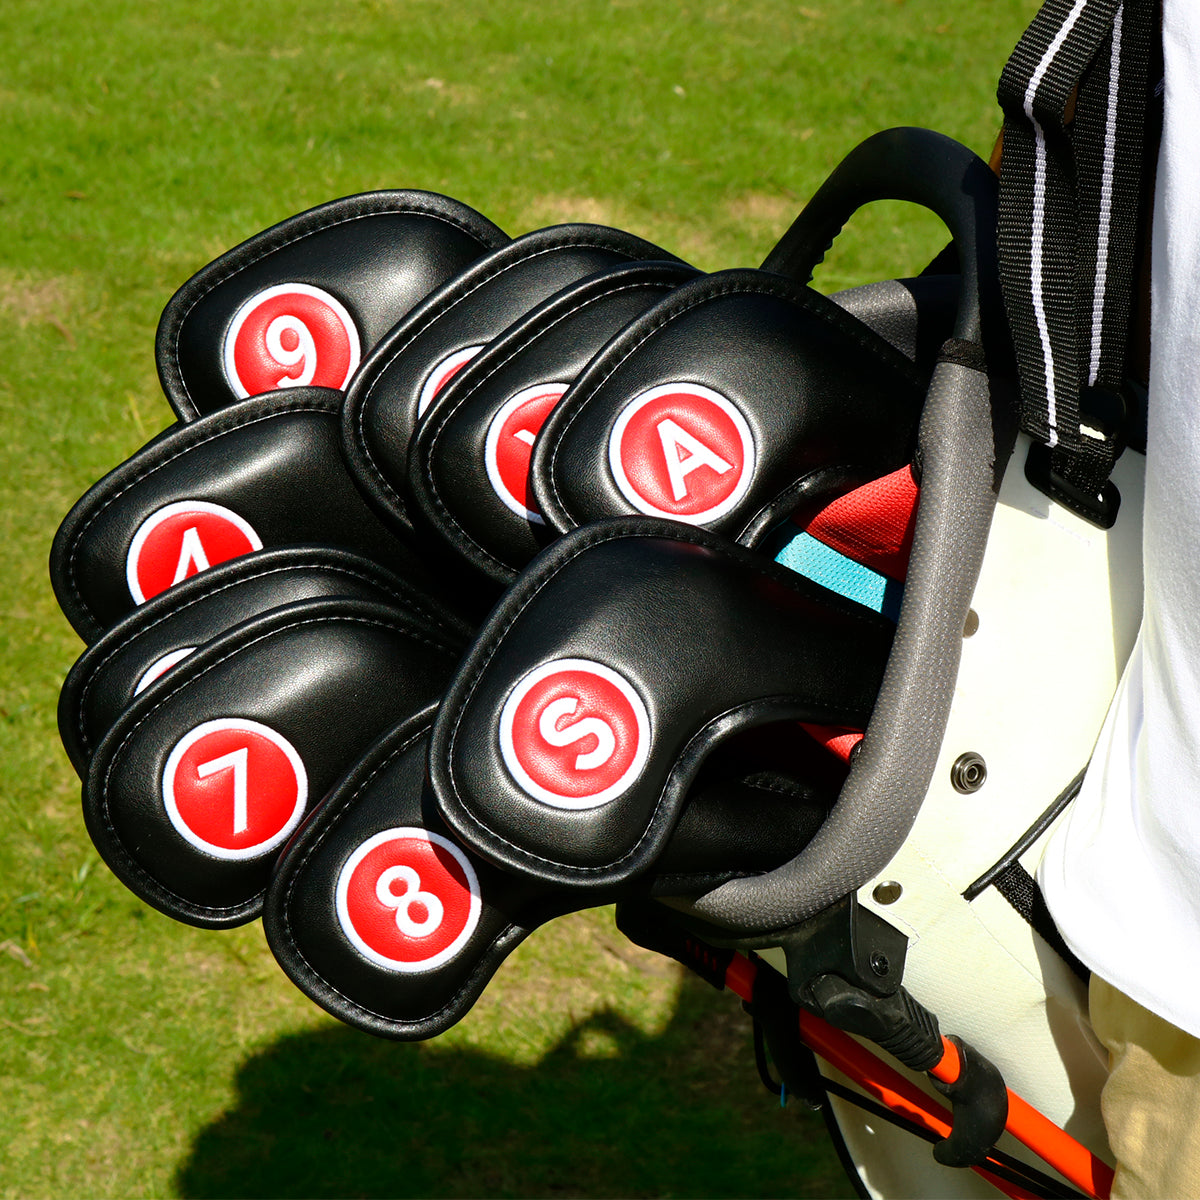 Magnetic Iron Head Covers - Craftsman Golf